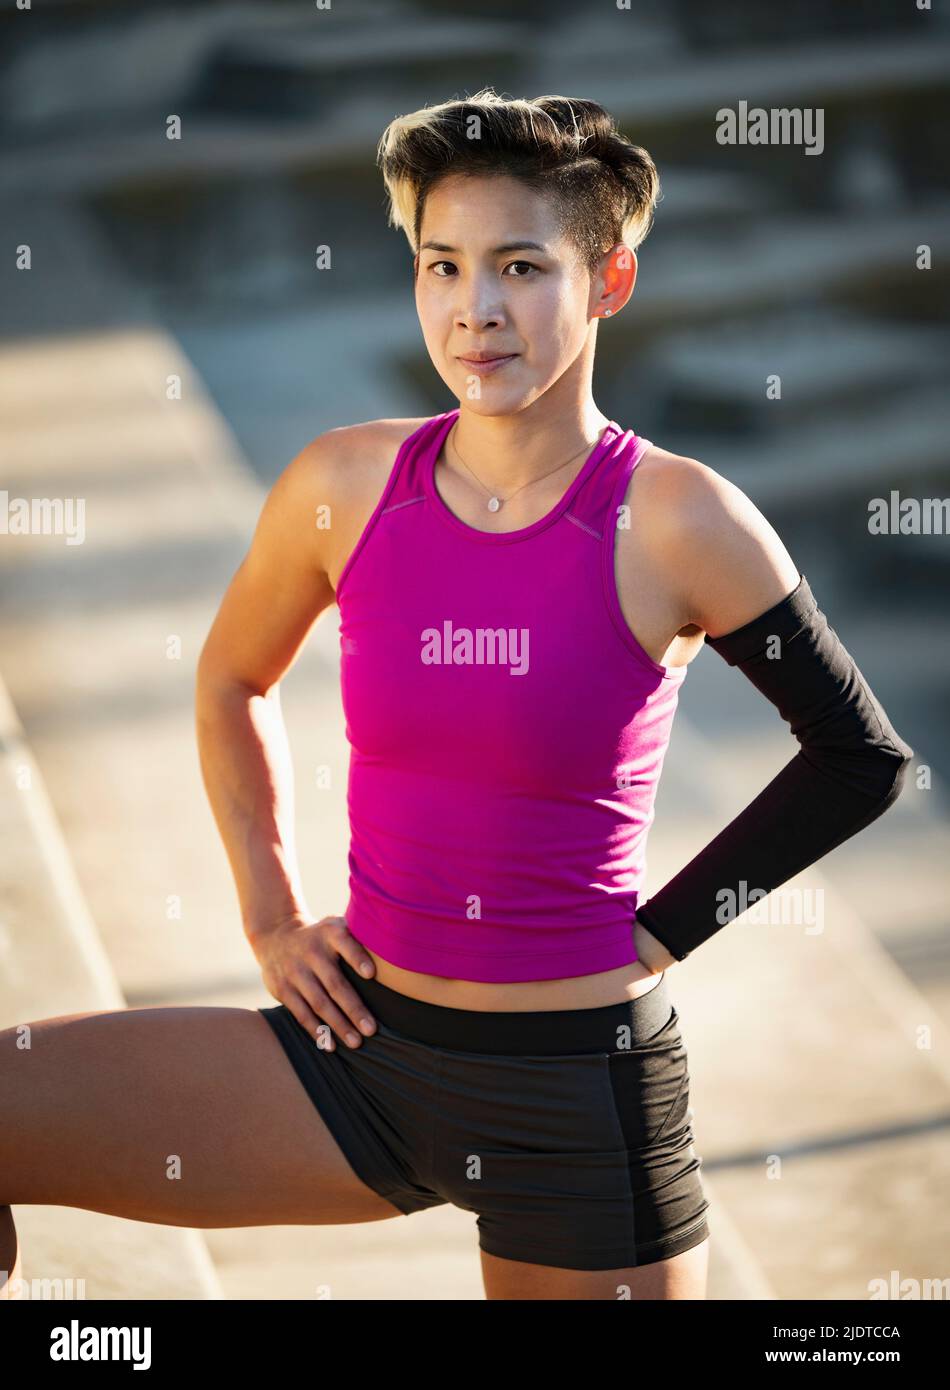 Portrait of athlete woman with amputated hand Stock Photo